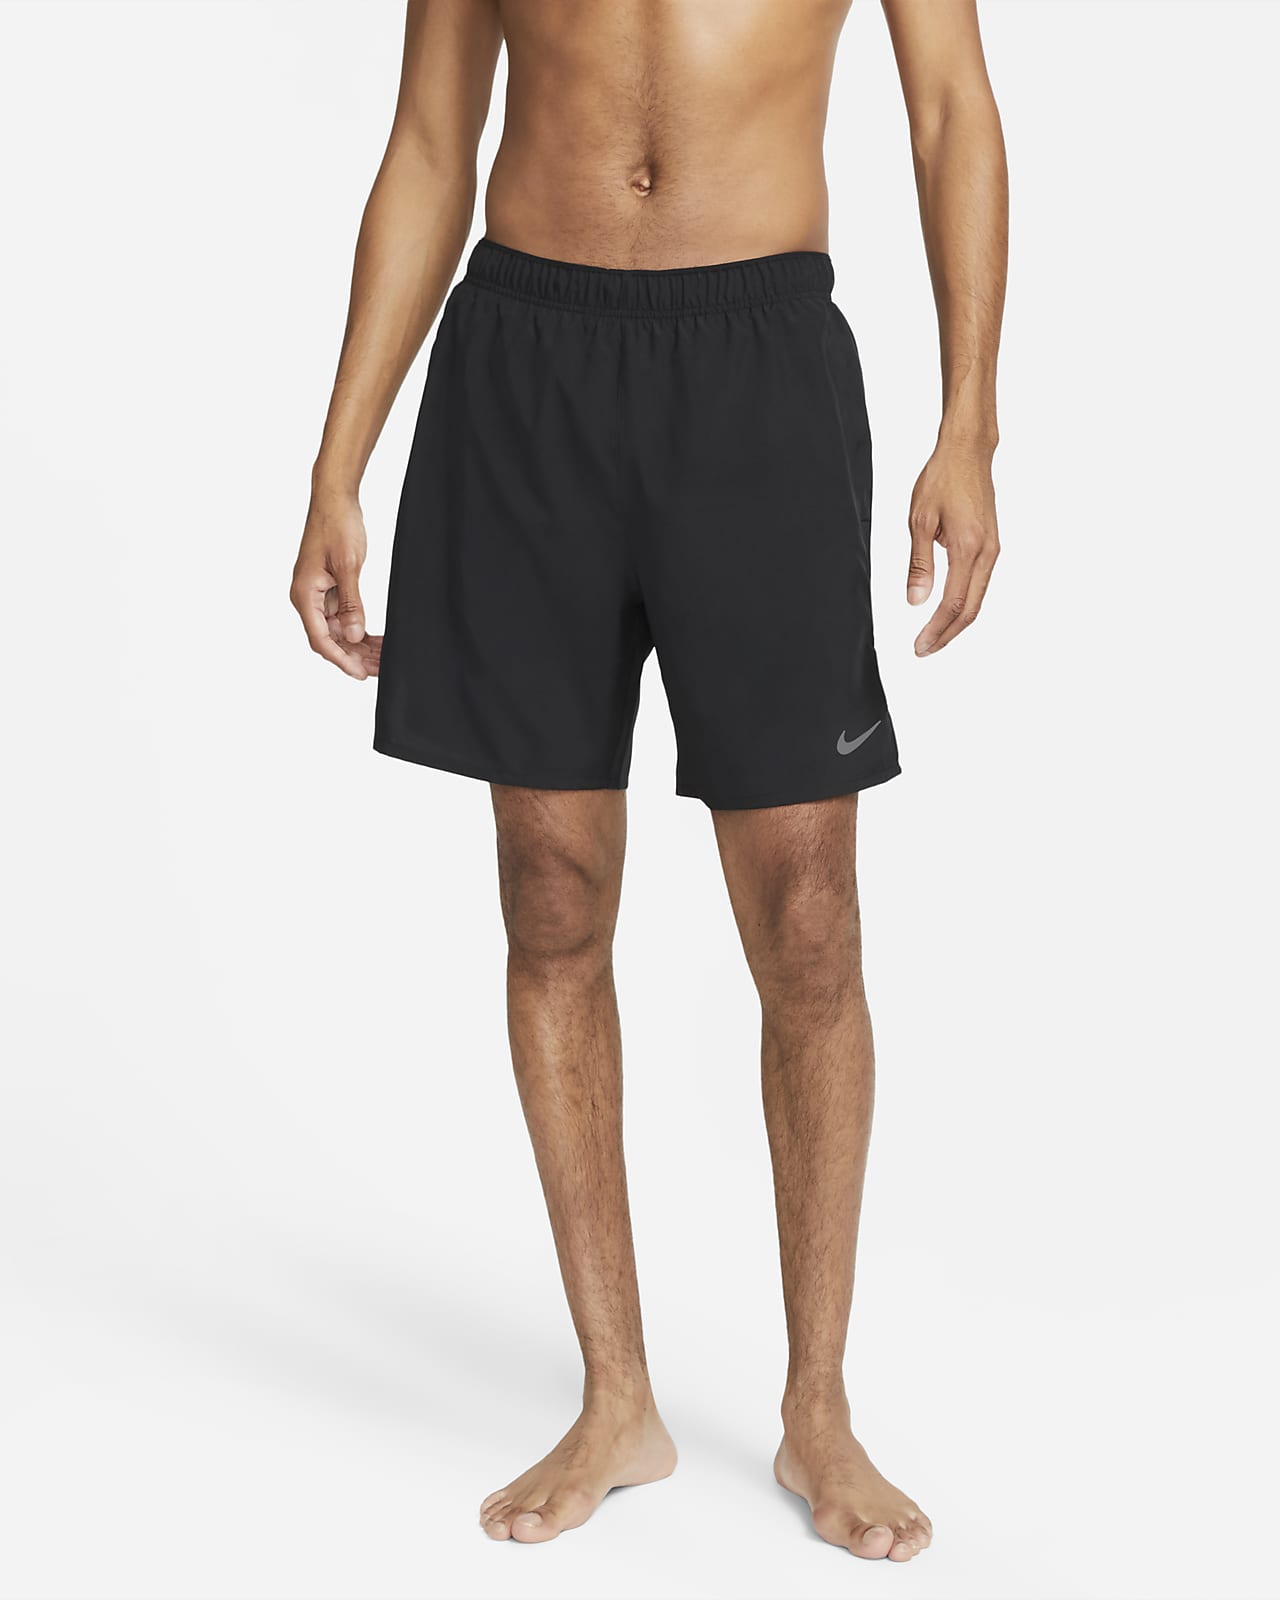 Nike Dri-FIT Challenger Men's 18cm (approx.) 2-in-1 Running Shorts